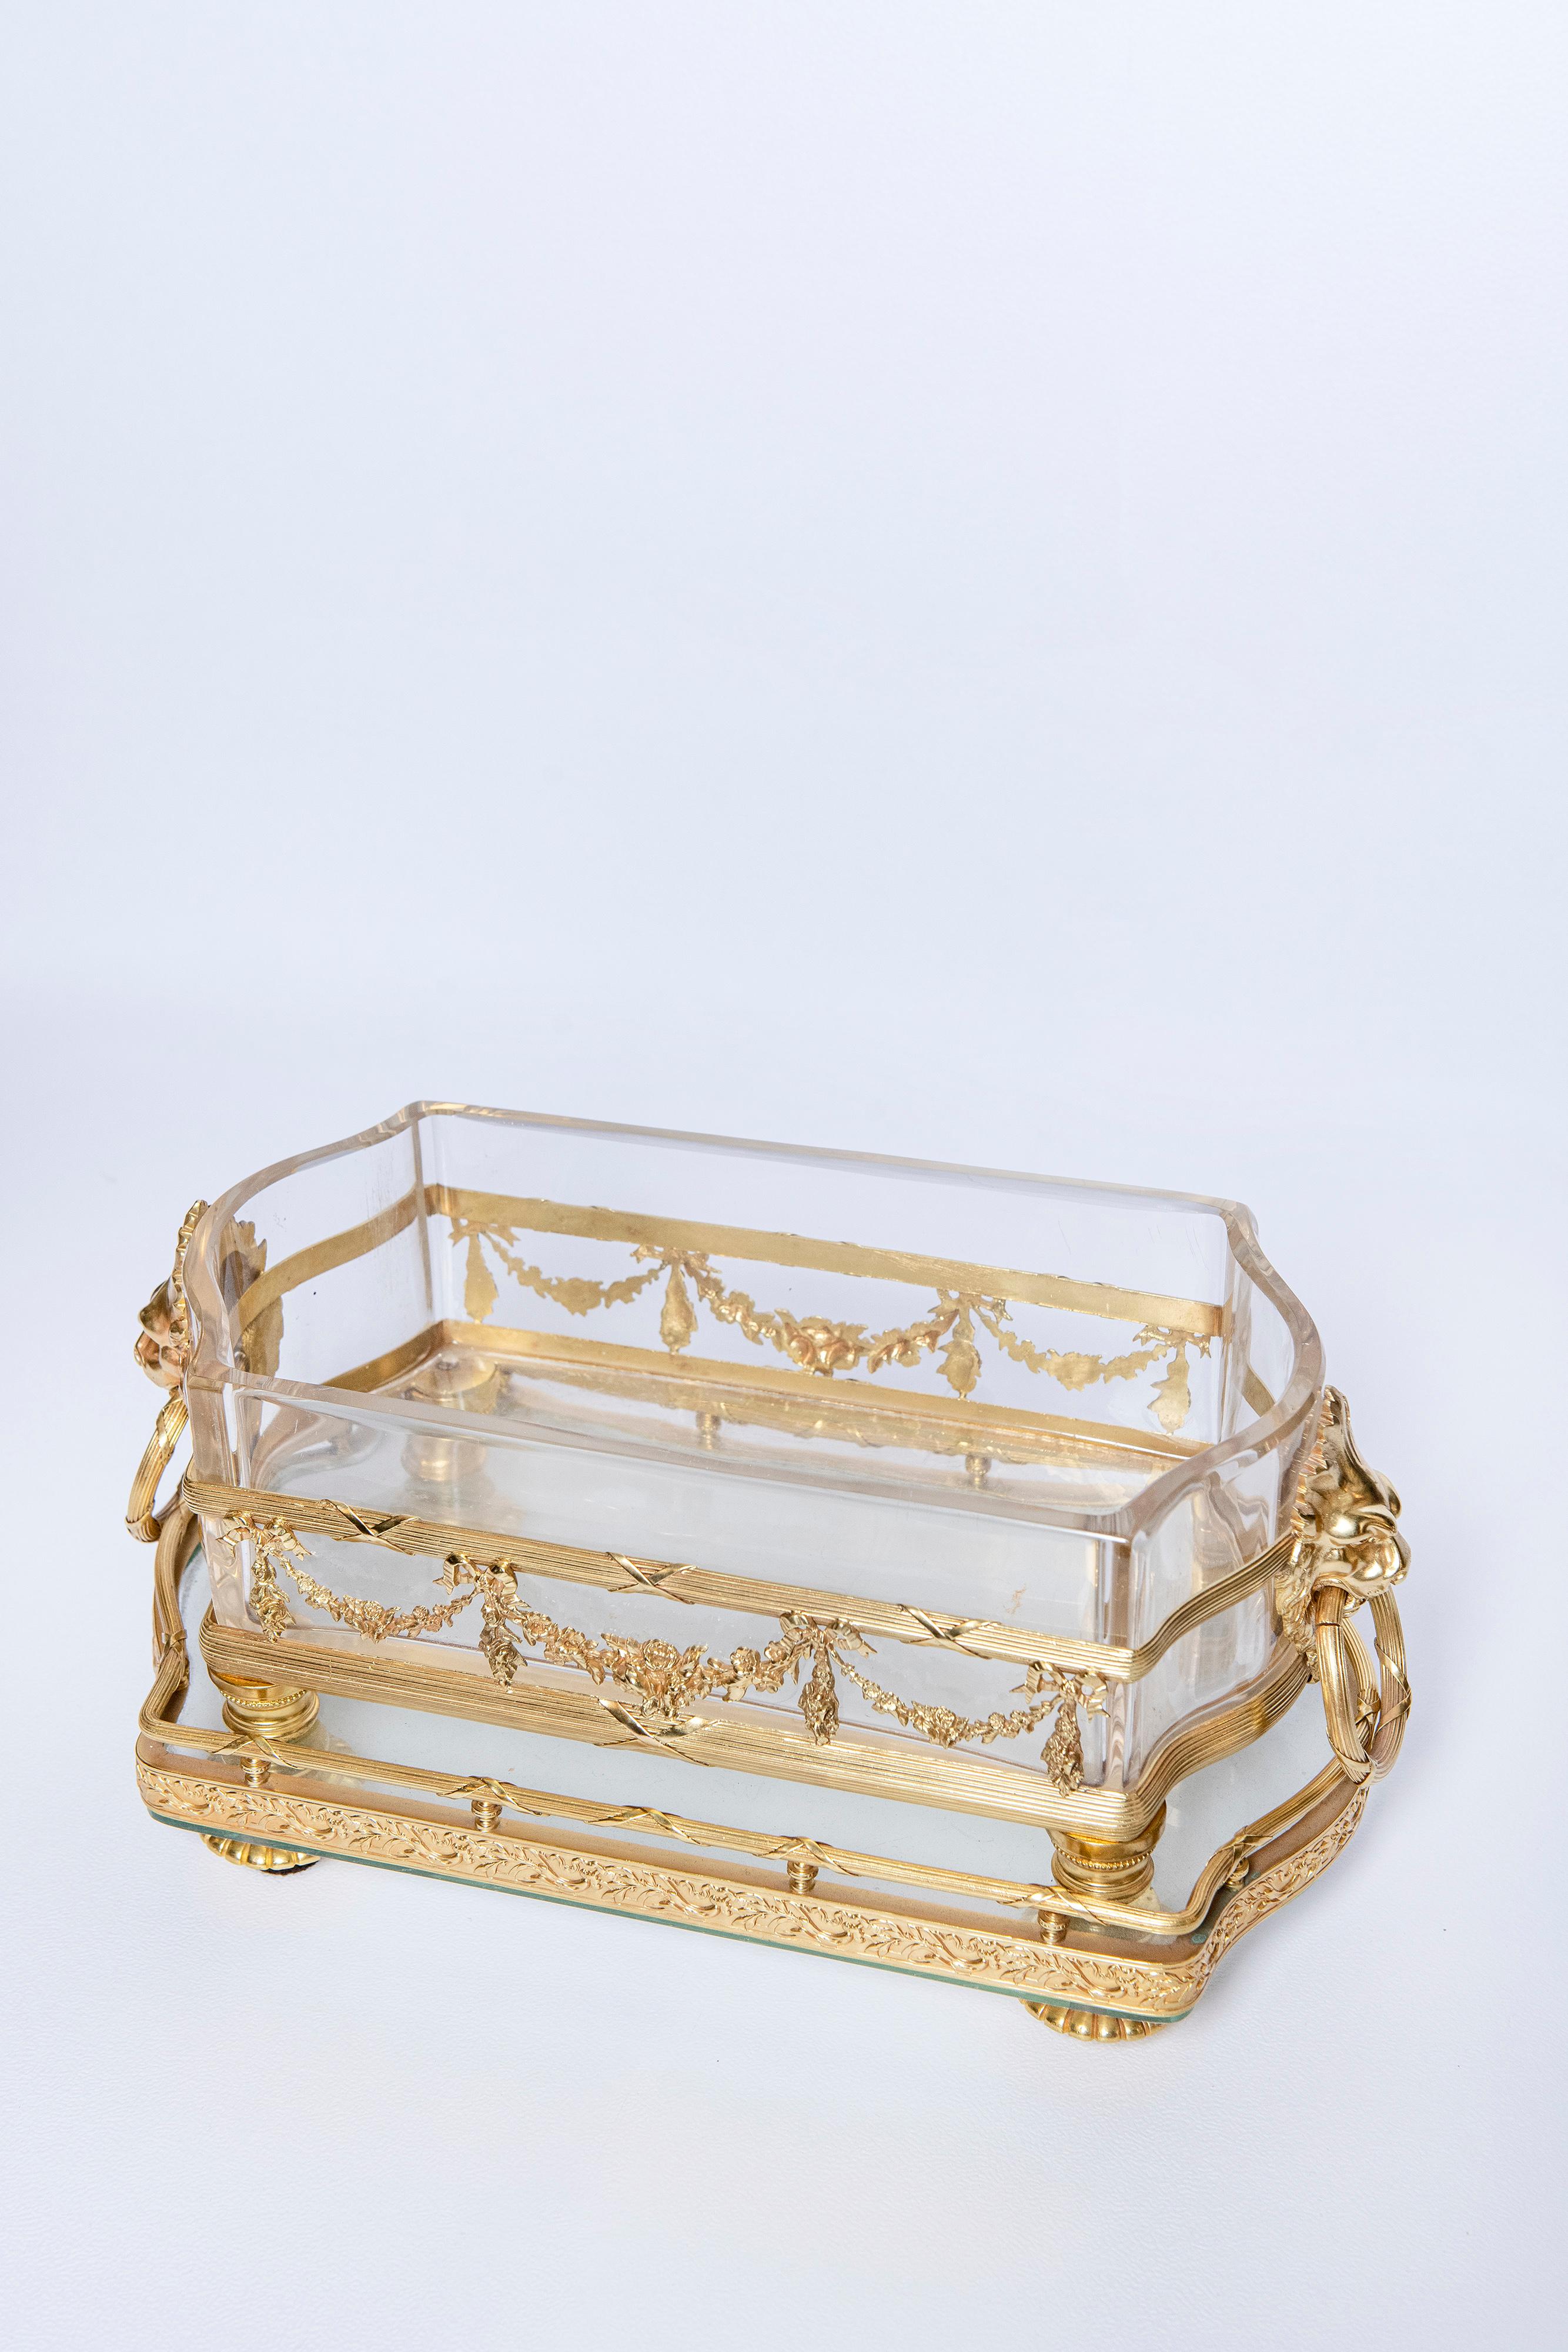 Neoclassical Crystal and Gilt Bronze Jardinière, France, Late 19th Century For Sale